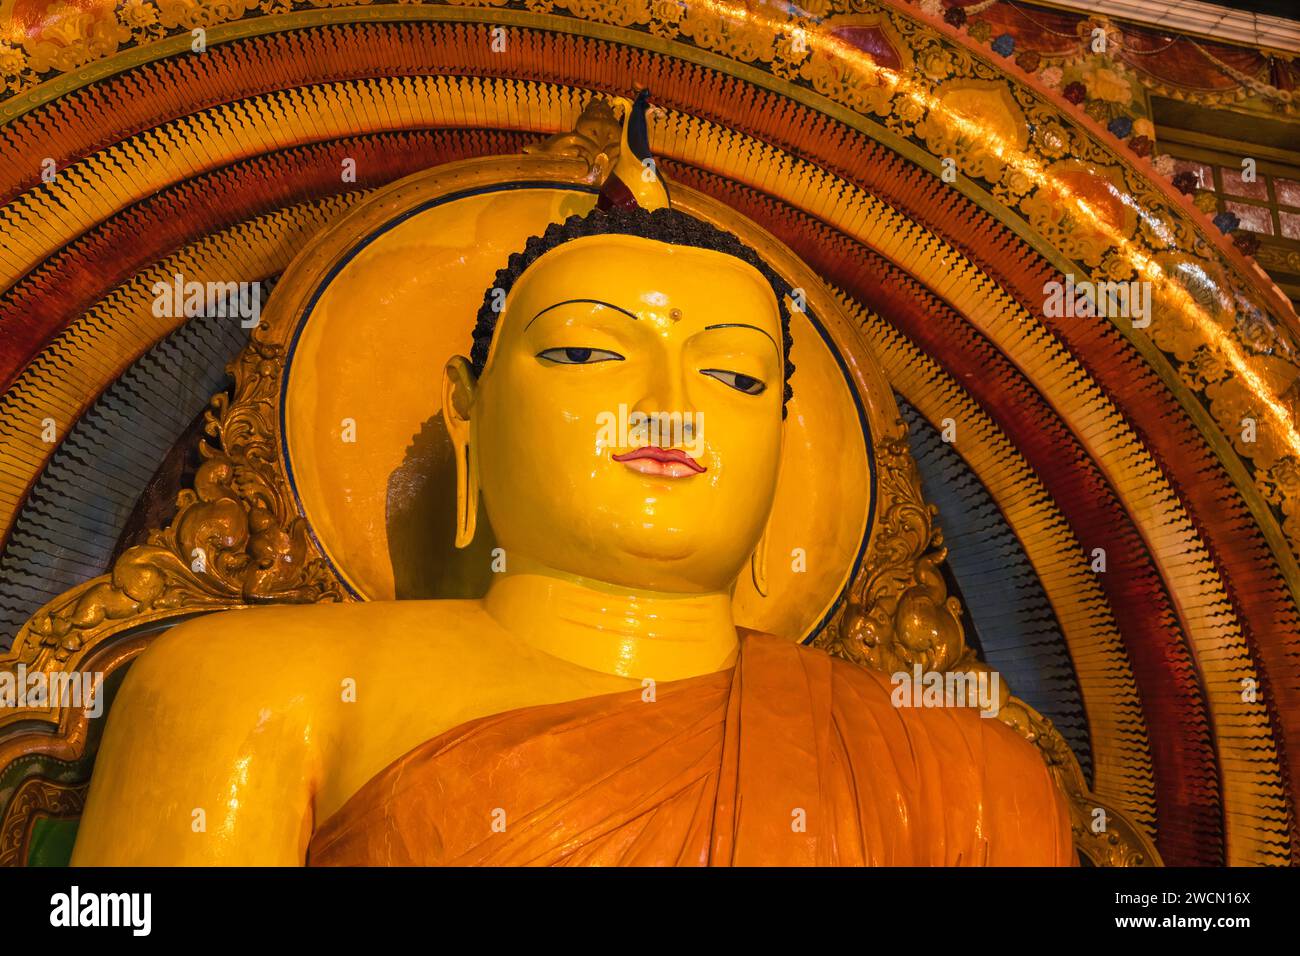 Face of the Buddha statue of the Gangaramaya temple, one of the biggest Buddhist temples of Colombo, the capital city of Sri Lanka Stock Photo